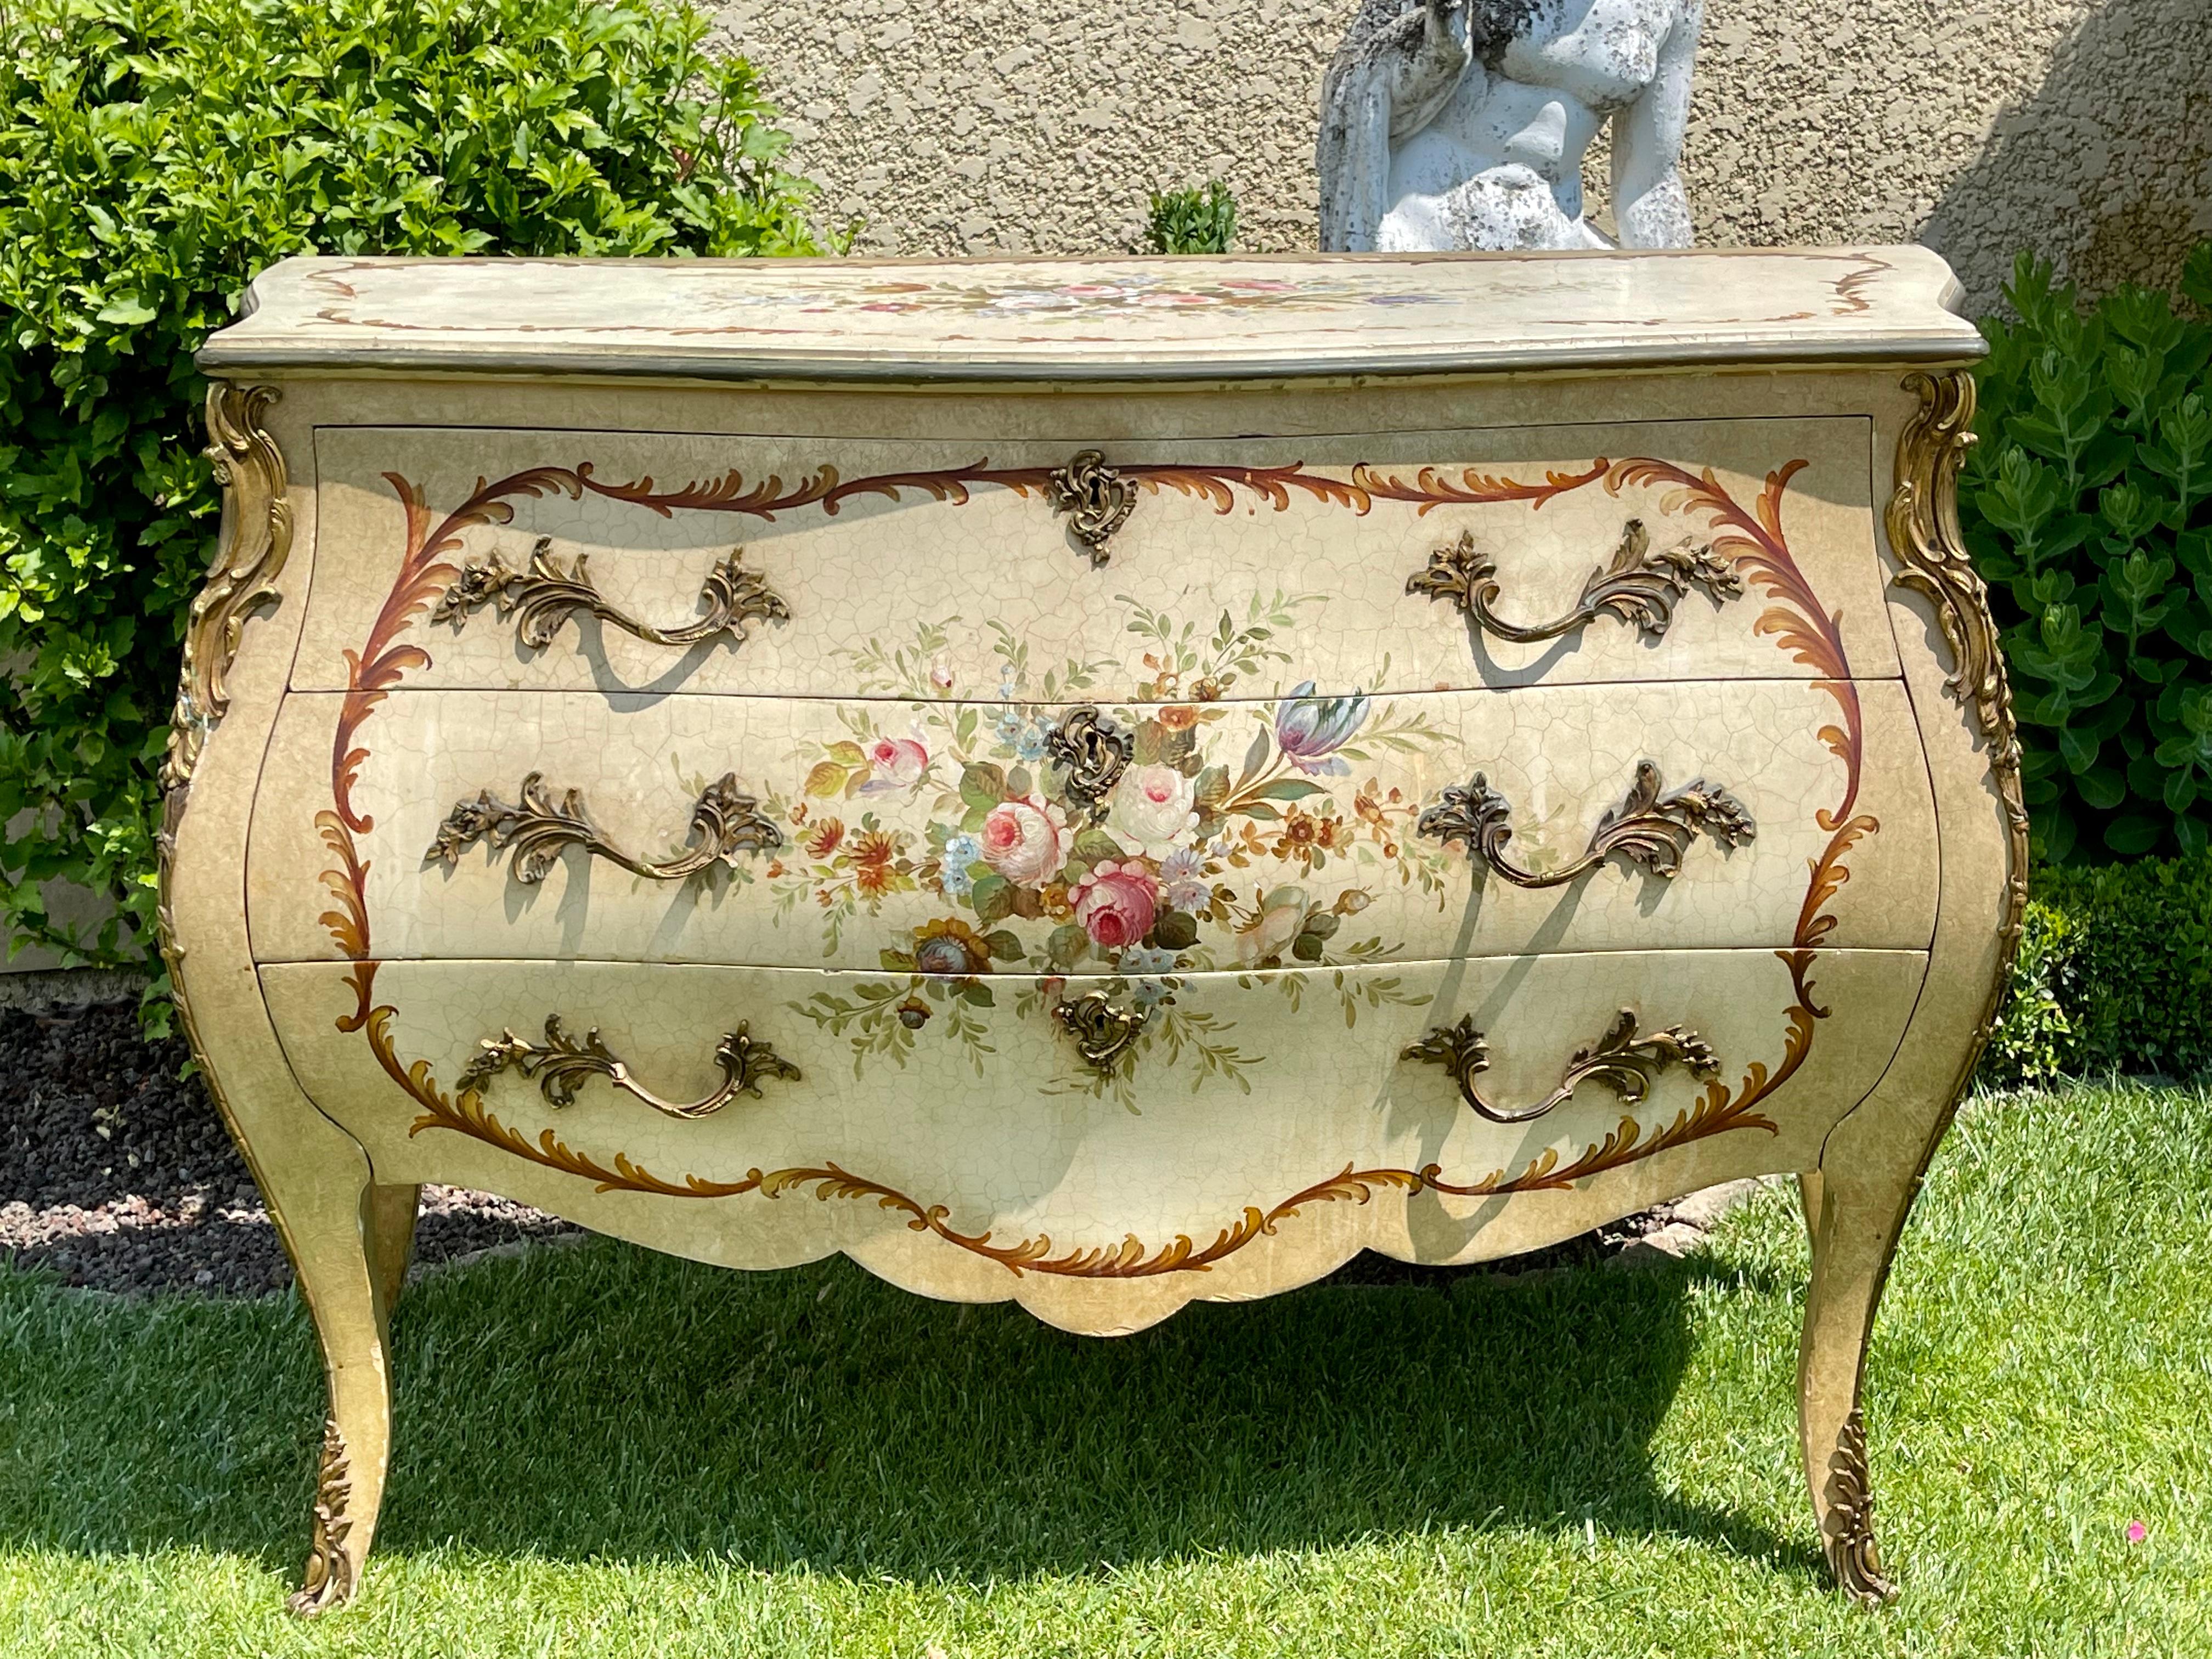 Louis XV style painted chest of drawers adorned with bronze with floral decorations. It has three drawers, is in good condition and complete.